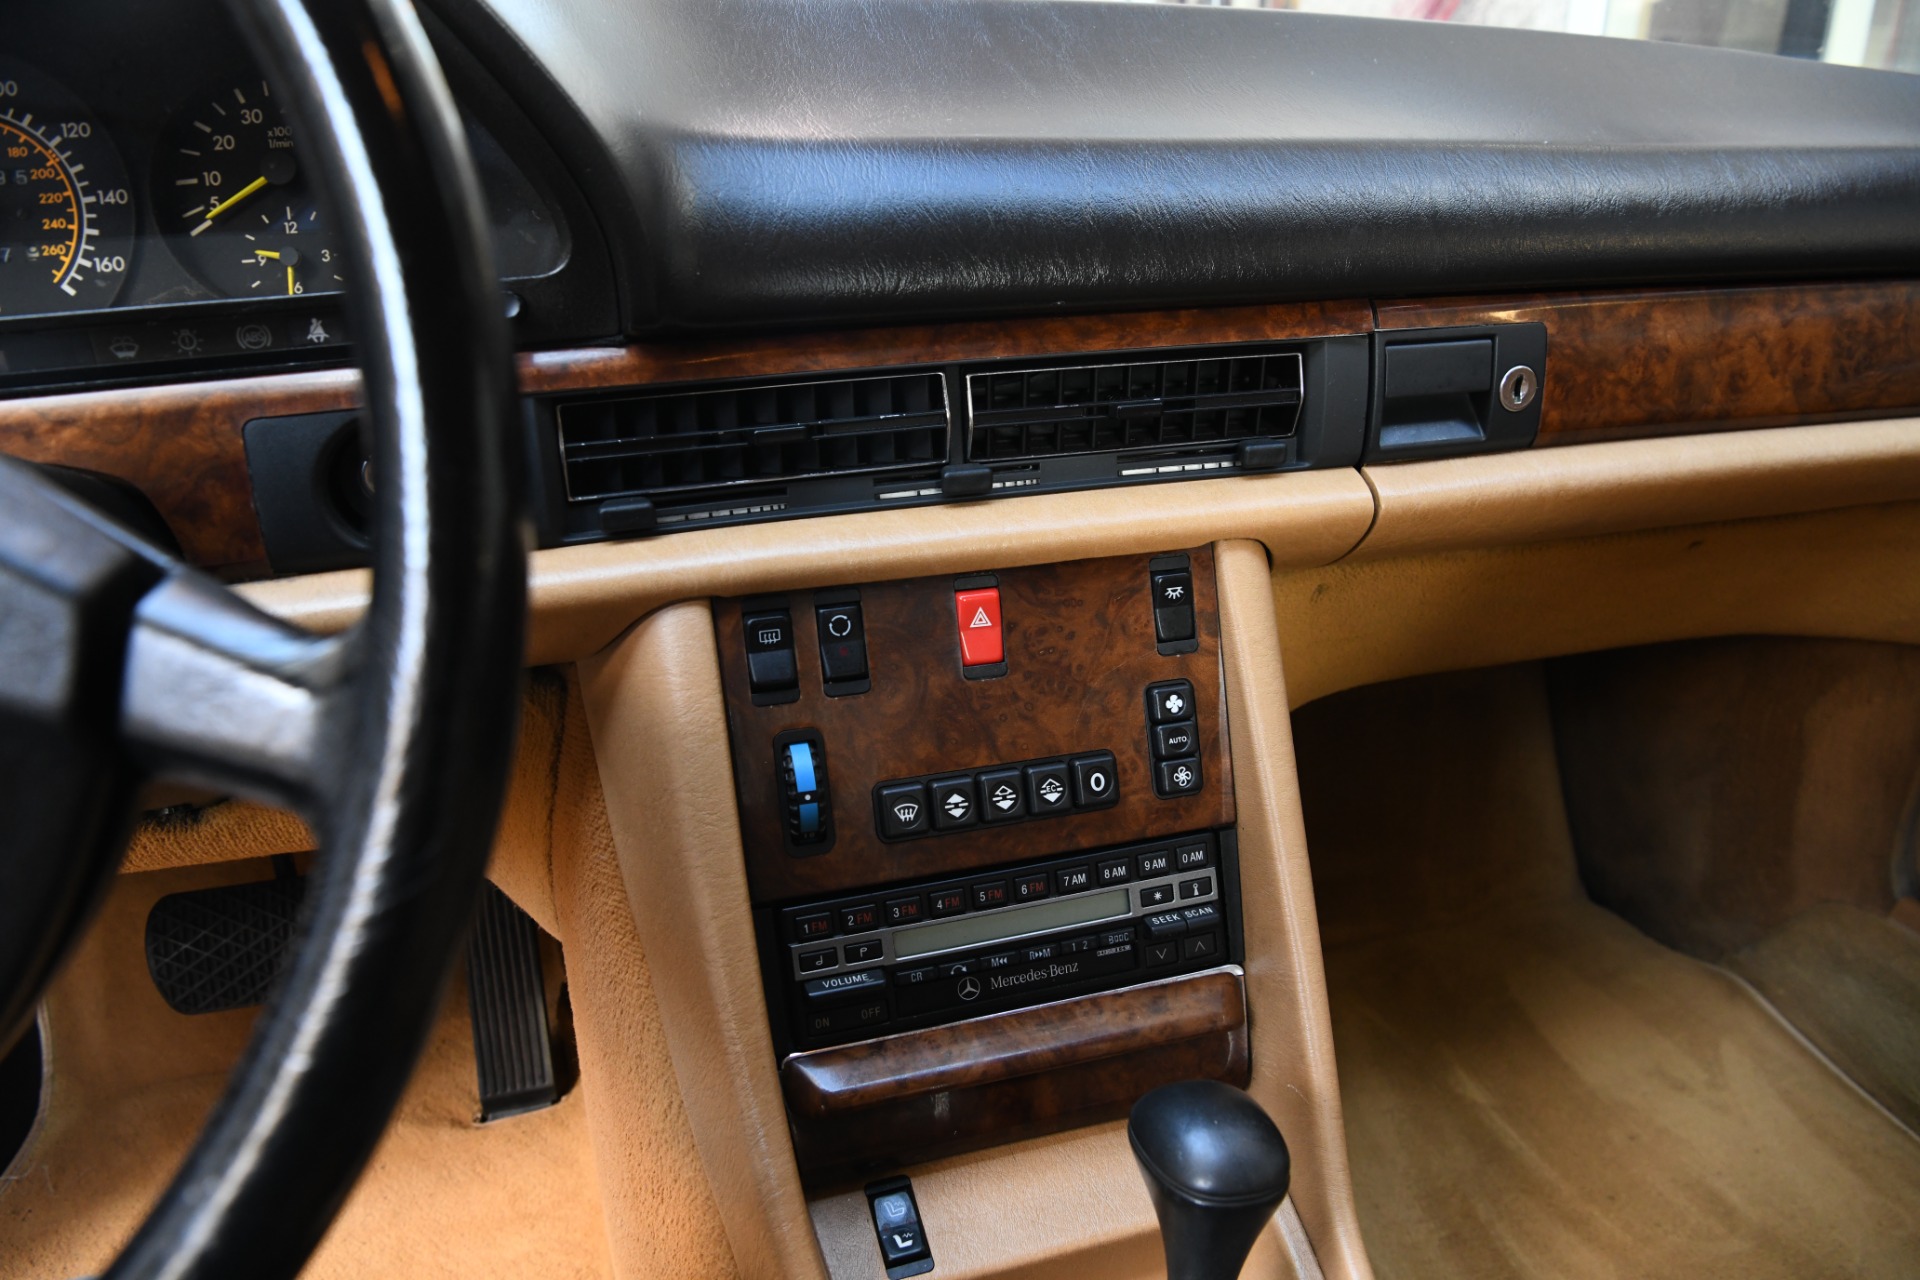 Used 1985 MERCEDES-BENZ 500 SEC  | Chicago, IL